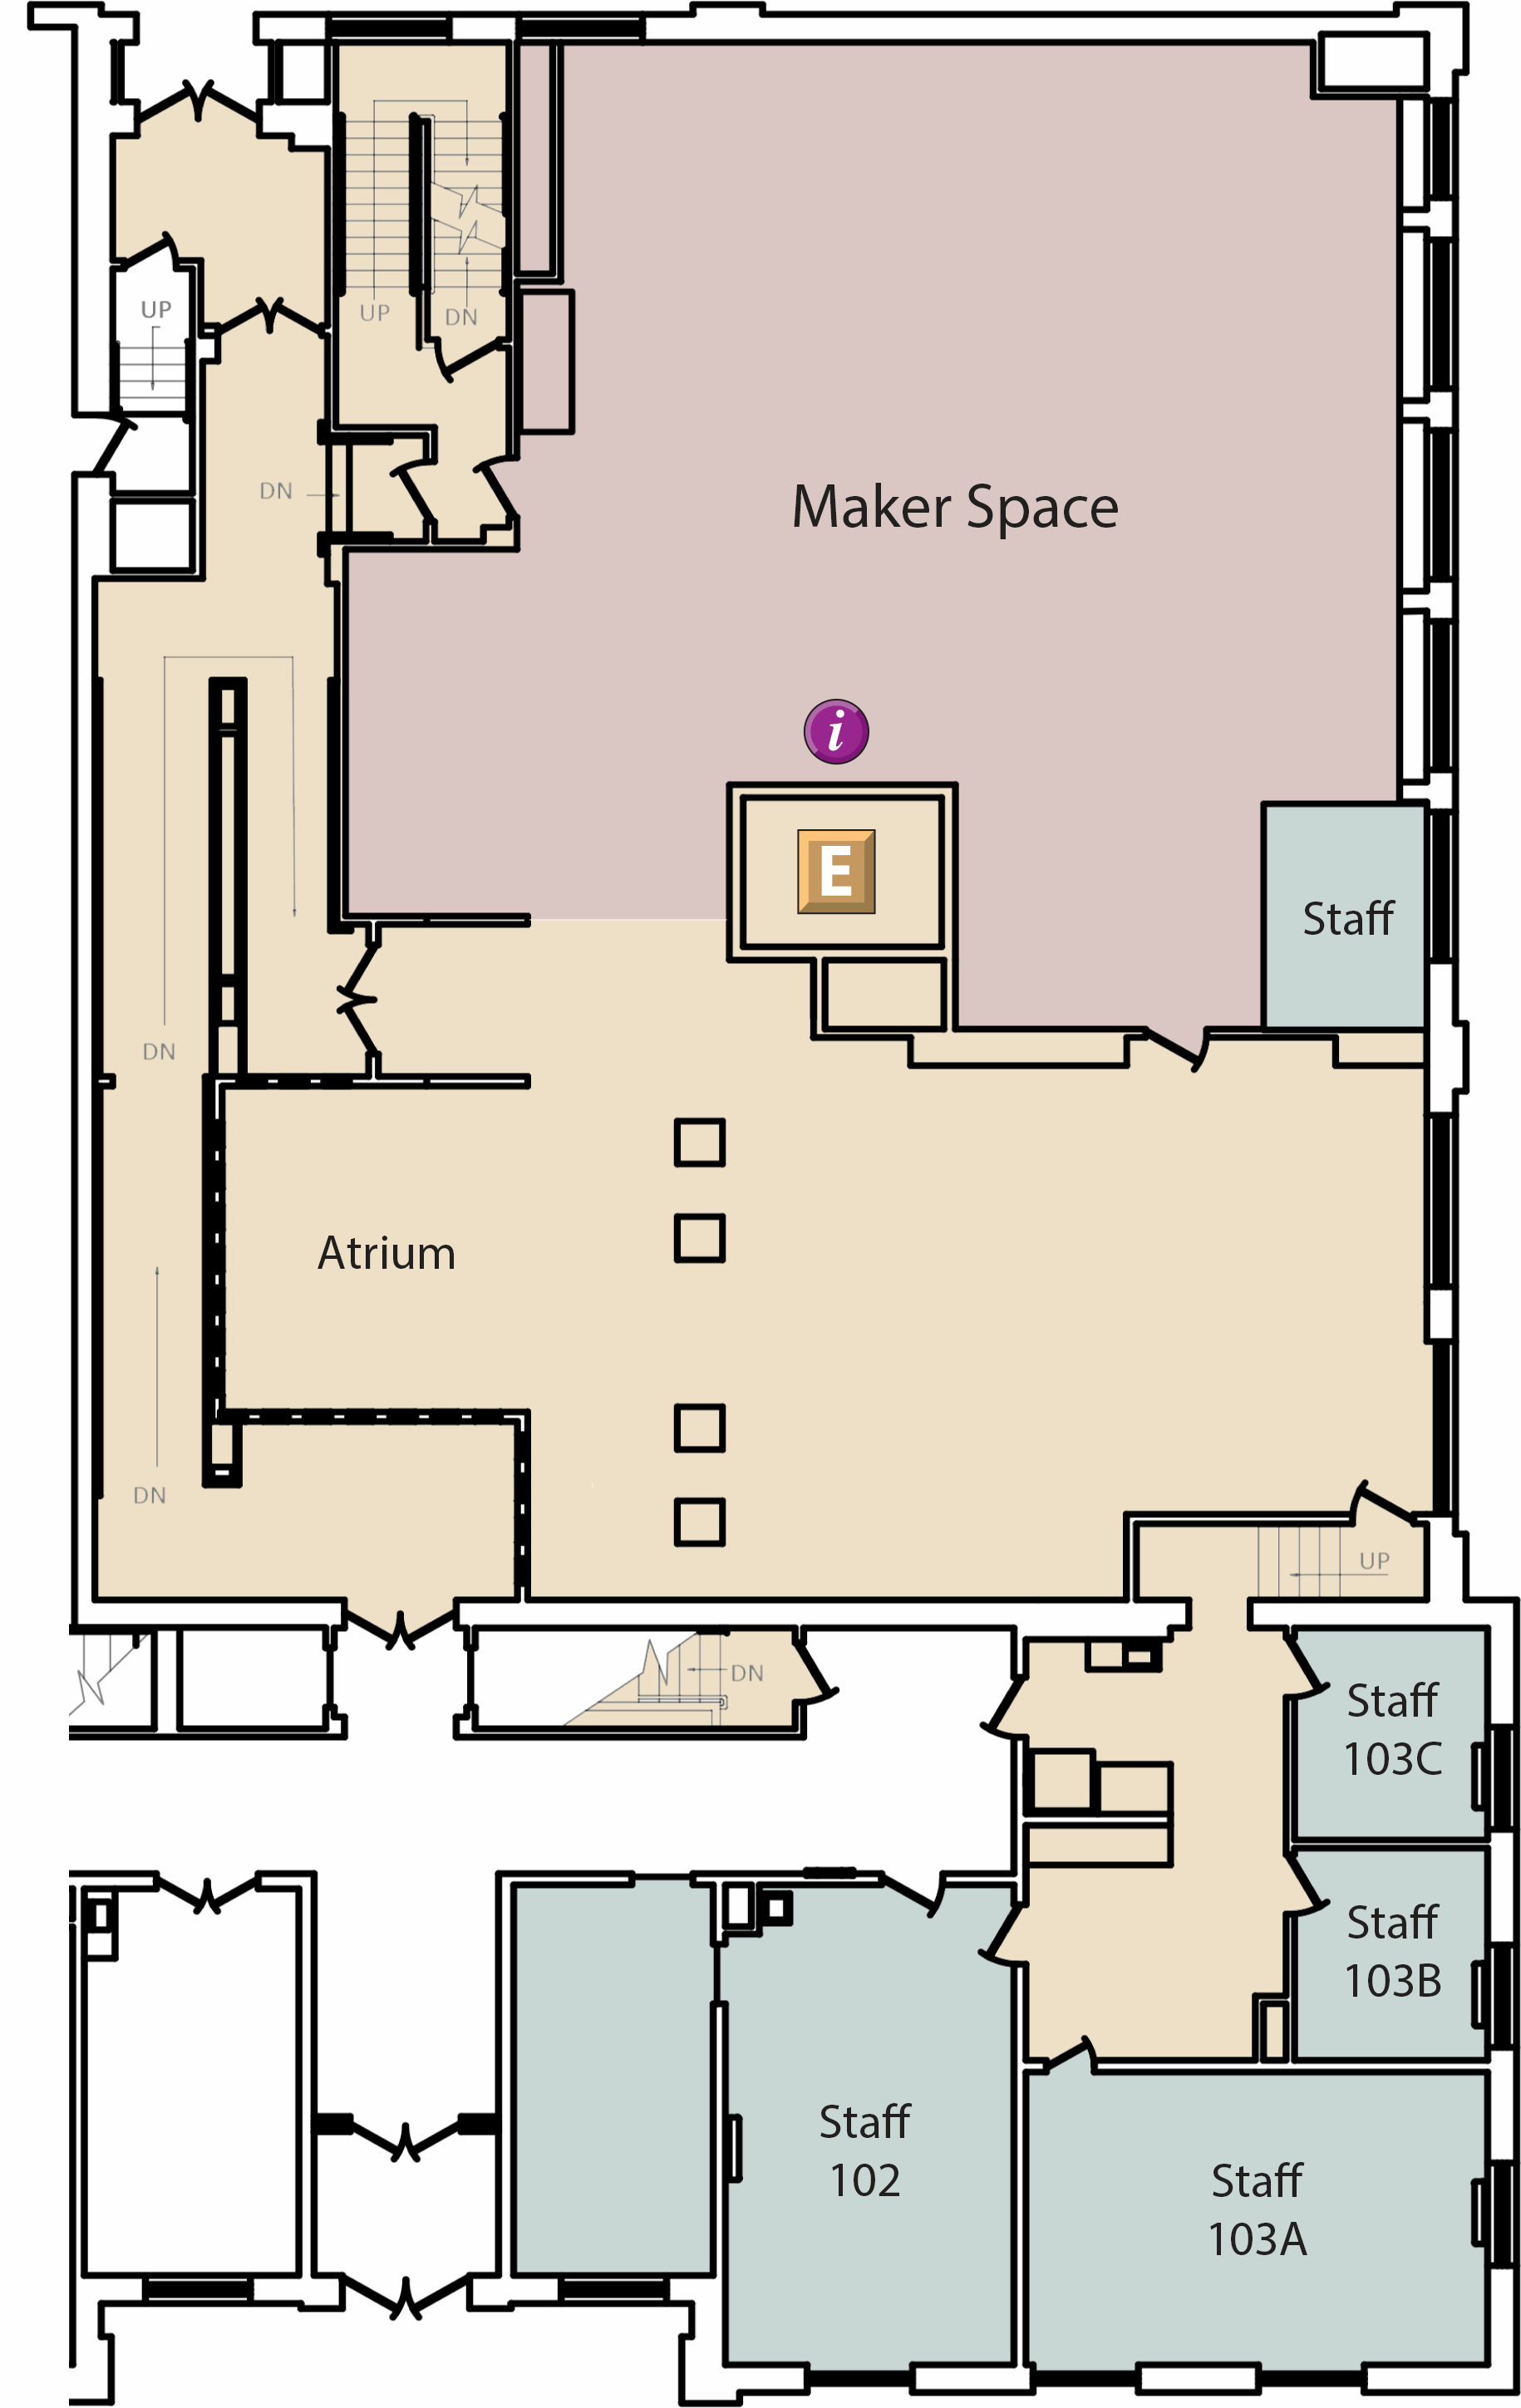 The First Floor map is a map of the DeLaMare Library at the University of Nevada, Reno main campus showing all of the rooms and features of the First Floor of the DeLaMare Library.  Getting to the first floor of the DeLaMare Library The first floor of the DeLaMare Library includes two outside entrances; one non-accessible entrance on the south end of the building and a wheelchair accessible entrance on the north end of the building. Stairs are also located on the north side of the first floor, which will lead to the second floor and the basement floor. An ADA ramp connects the north and south entrance to the building, as well as leading down into the first-floor area. A public elevator is located directly to the east of the first-floor ramp entrance.  Features of the First Floor The first floor includes the Maker Space area on the east side of the building, and staff cubicles located southeast of the Maker Space area.  The Atrium is an open area and is southwest of the first floor.  A communal kitchen located on the south end of the first floor is available to library staff and students  Library Staff office rooms, 102, 103A, 103B, and 103C, are also located in the kitchen communal area.